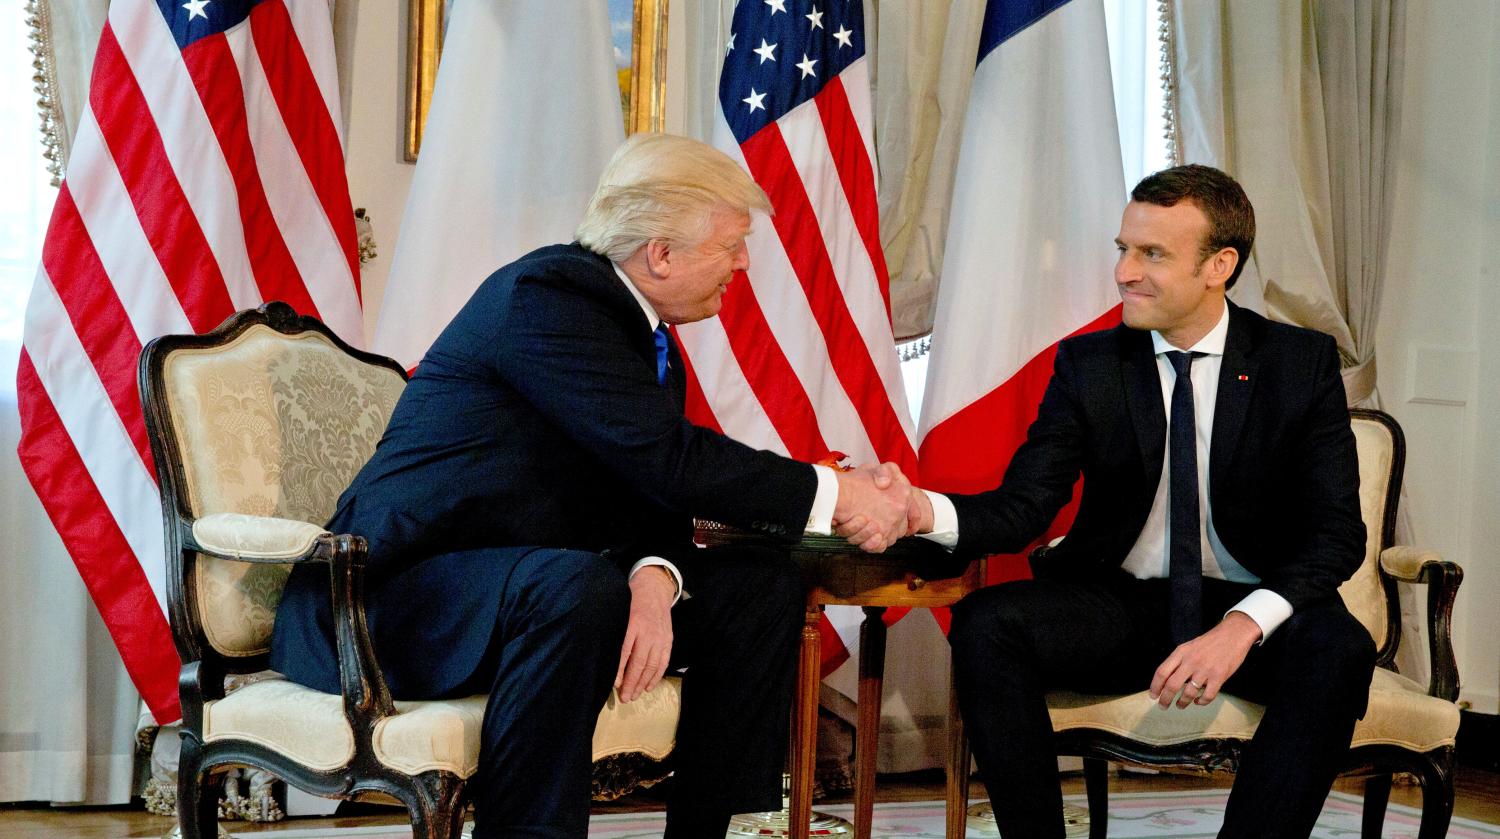 U.S. President Donald Trump (L) shakes hands with French President Emmanuel Macron before a working lunch ahead of a NATO Summit in Brussels, Belgium, May 25, 2017. REUTERS/Peter Dejong/Pool - RTX37KVY